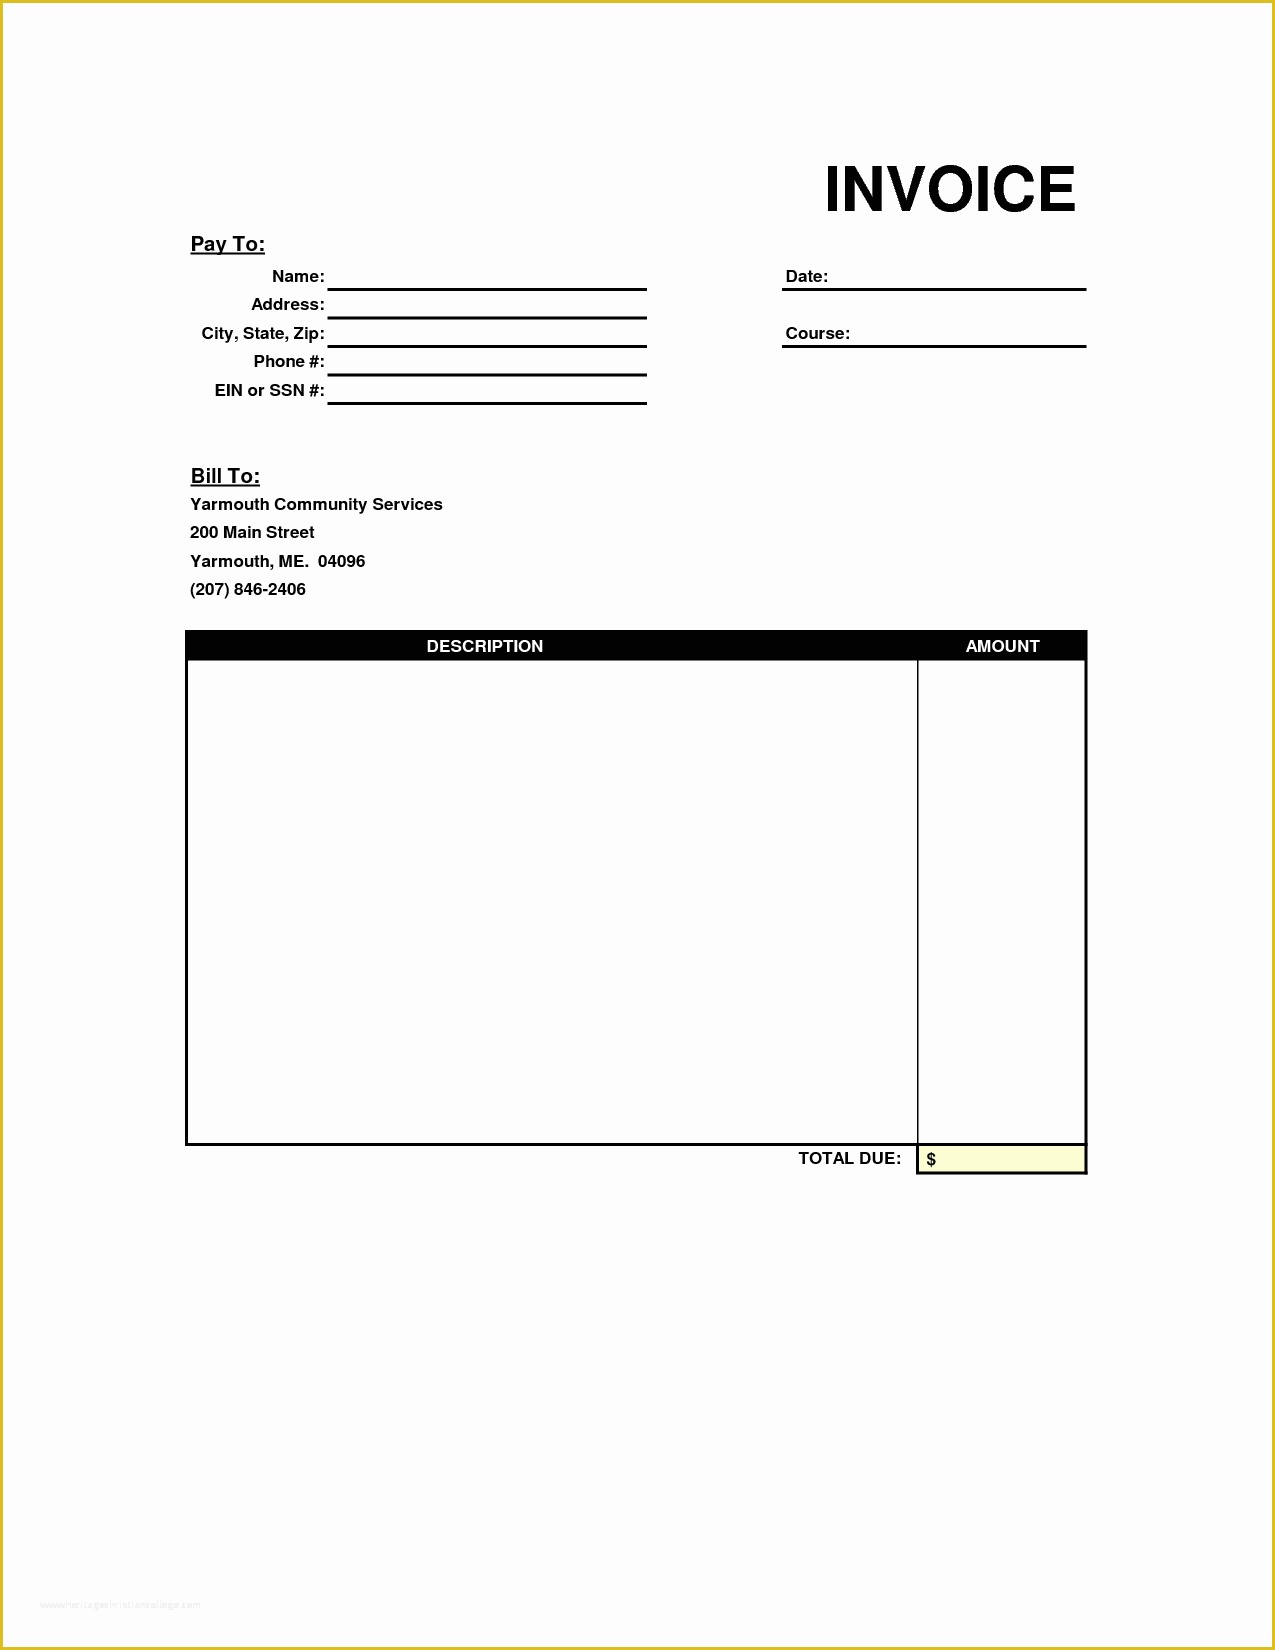 Ms Invoice Template Free Word Of Free Printable Invoice Template Uk Heritagechristiancollege